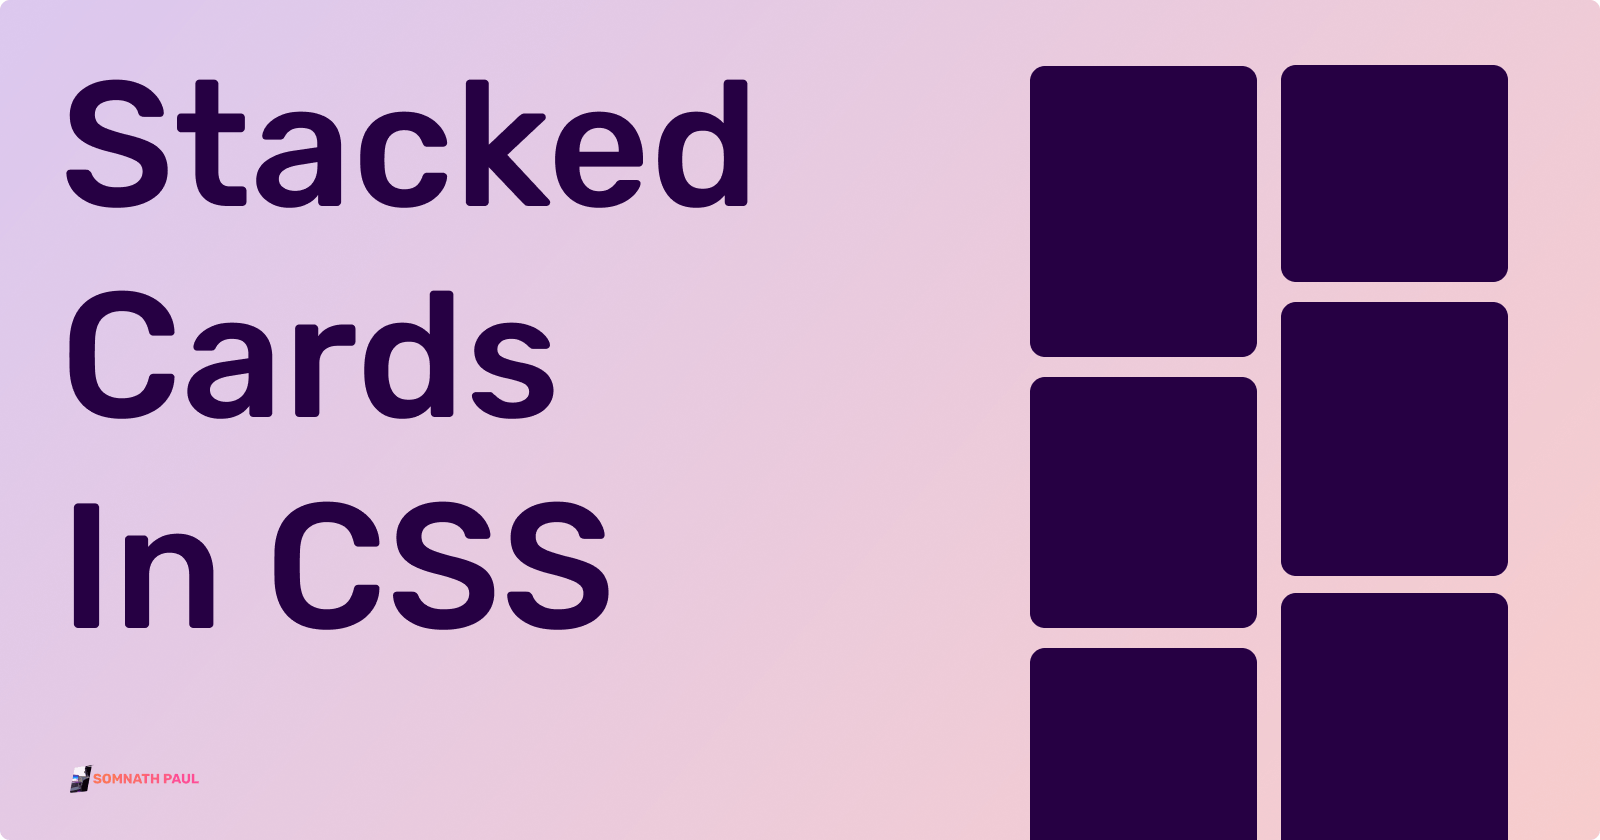 The proper way to stack card items in CSS